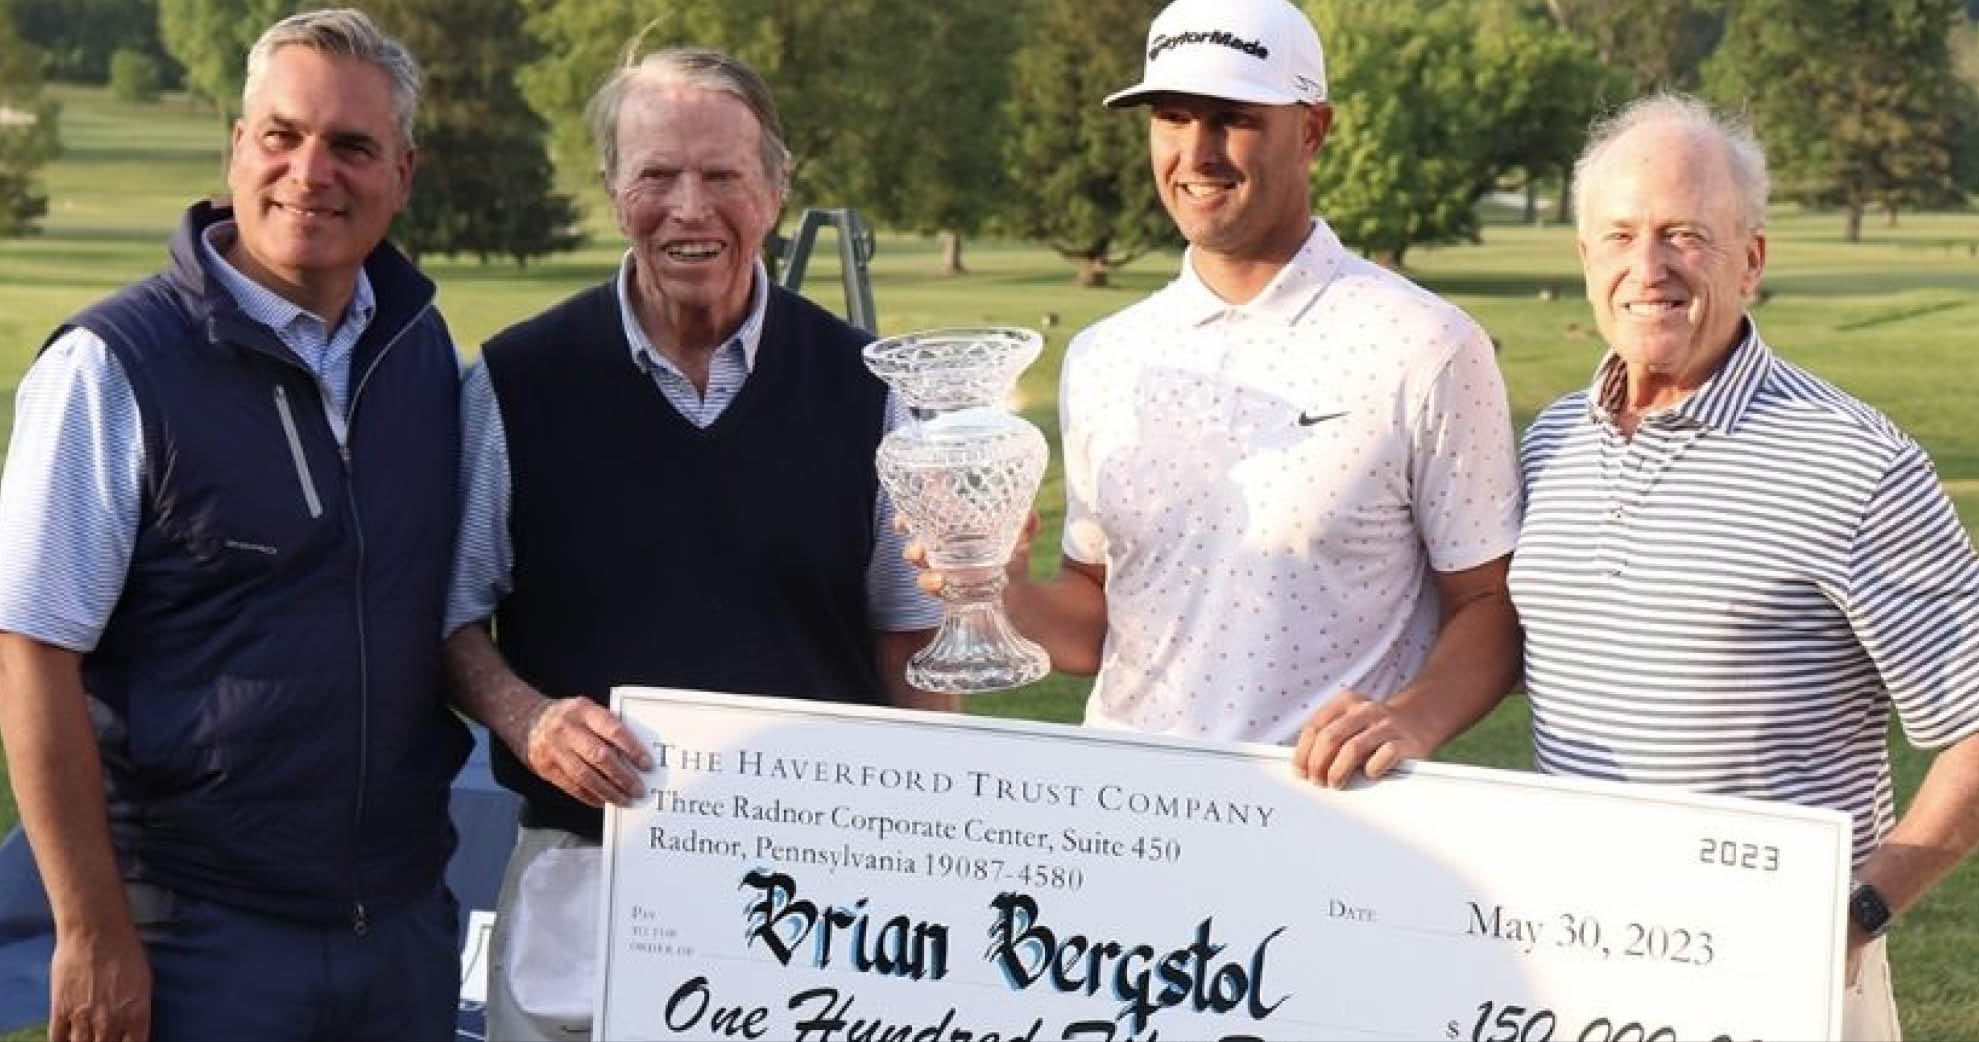 PGA Member Brian Bergstol Wins 25th Haverford Philadelphia PGA Classic and $150,000 Prize in Sudden Death Playoff